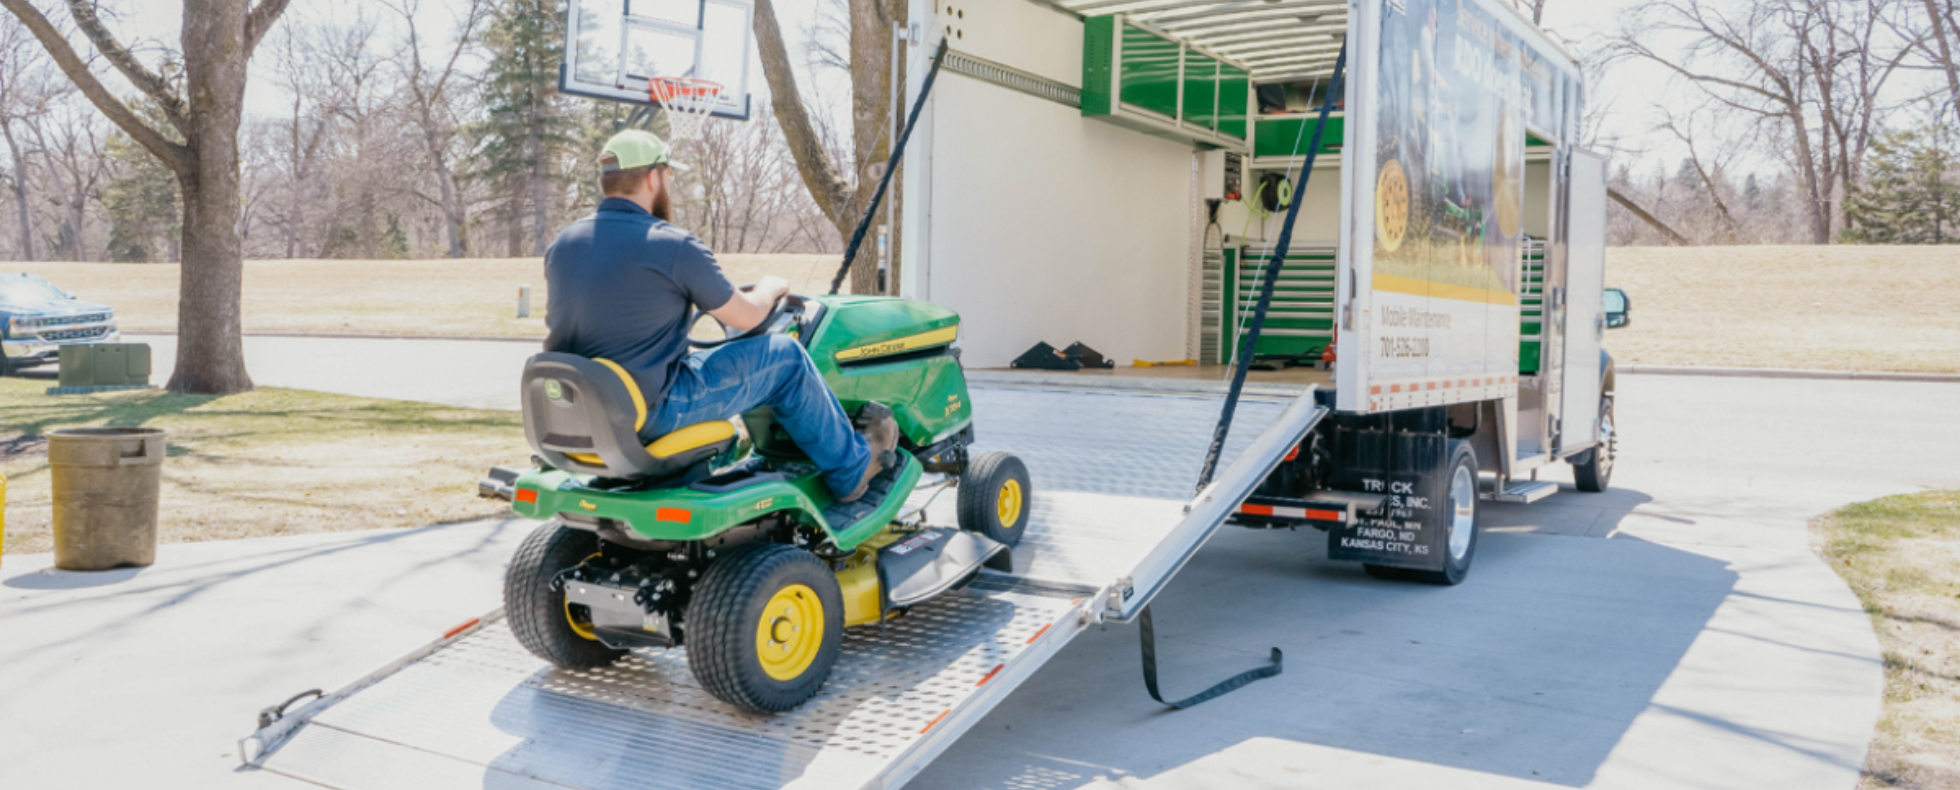 Maintaining Lawn and Garden Equipment with Mobile Maintenance from RDO Equipment Co.